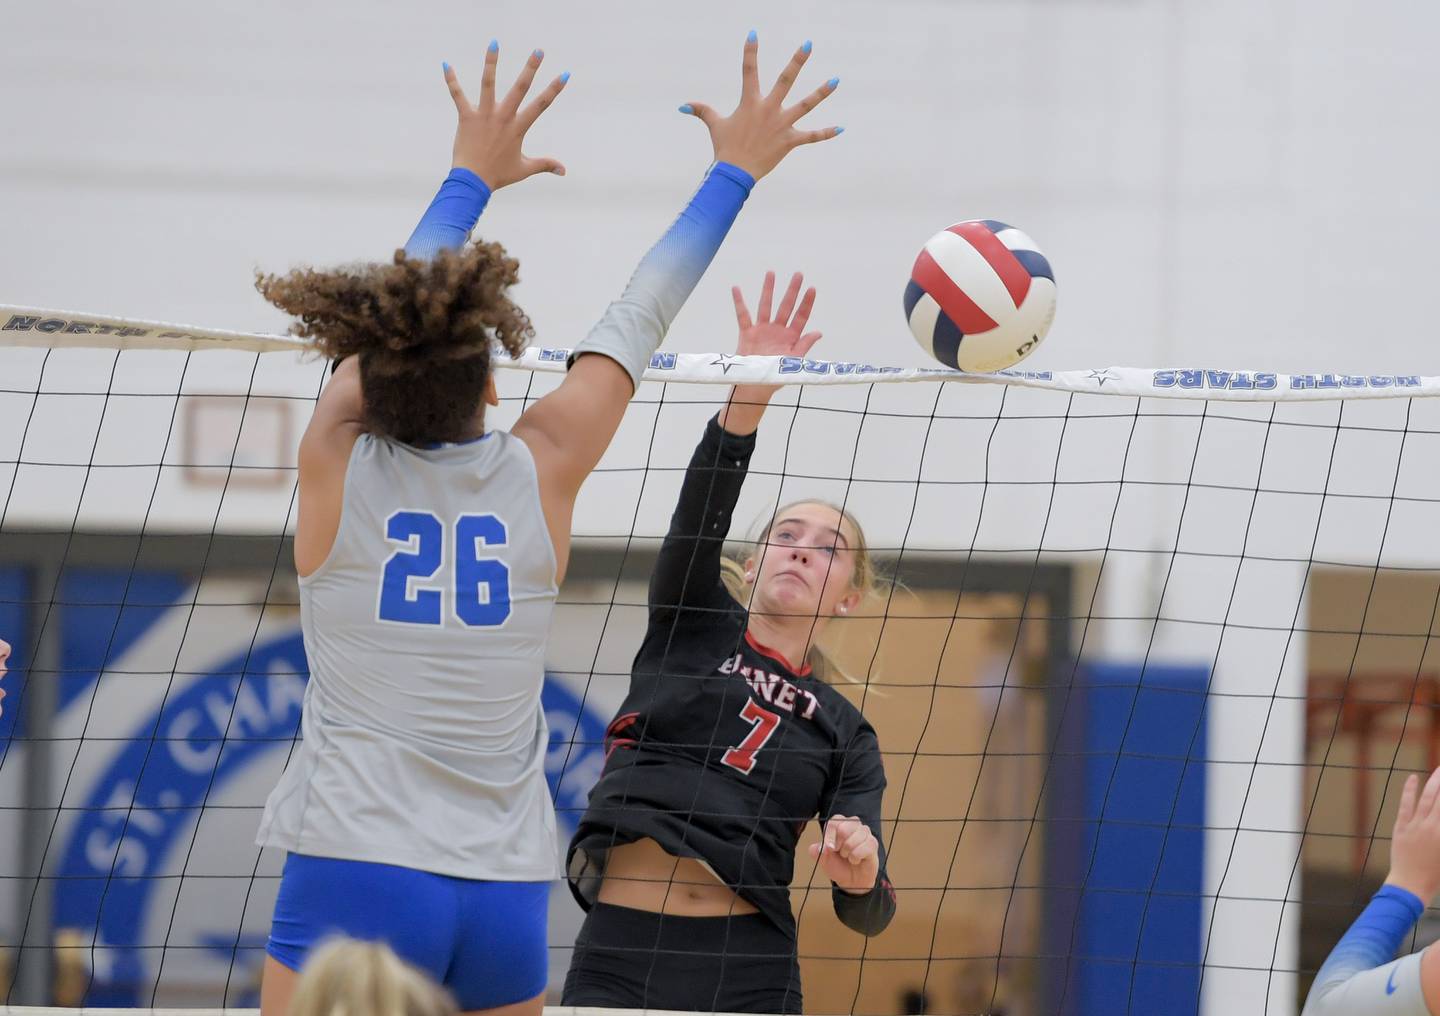 Benet's Audrey Asleson (7) hits the ball past St. Charles North's Sidney Wright (26) during a game on Wednesday, September 20, 2023.